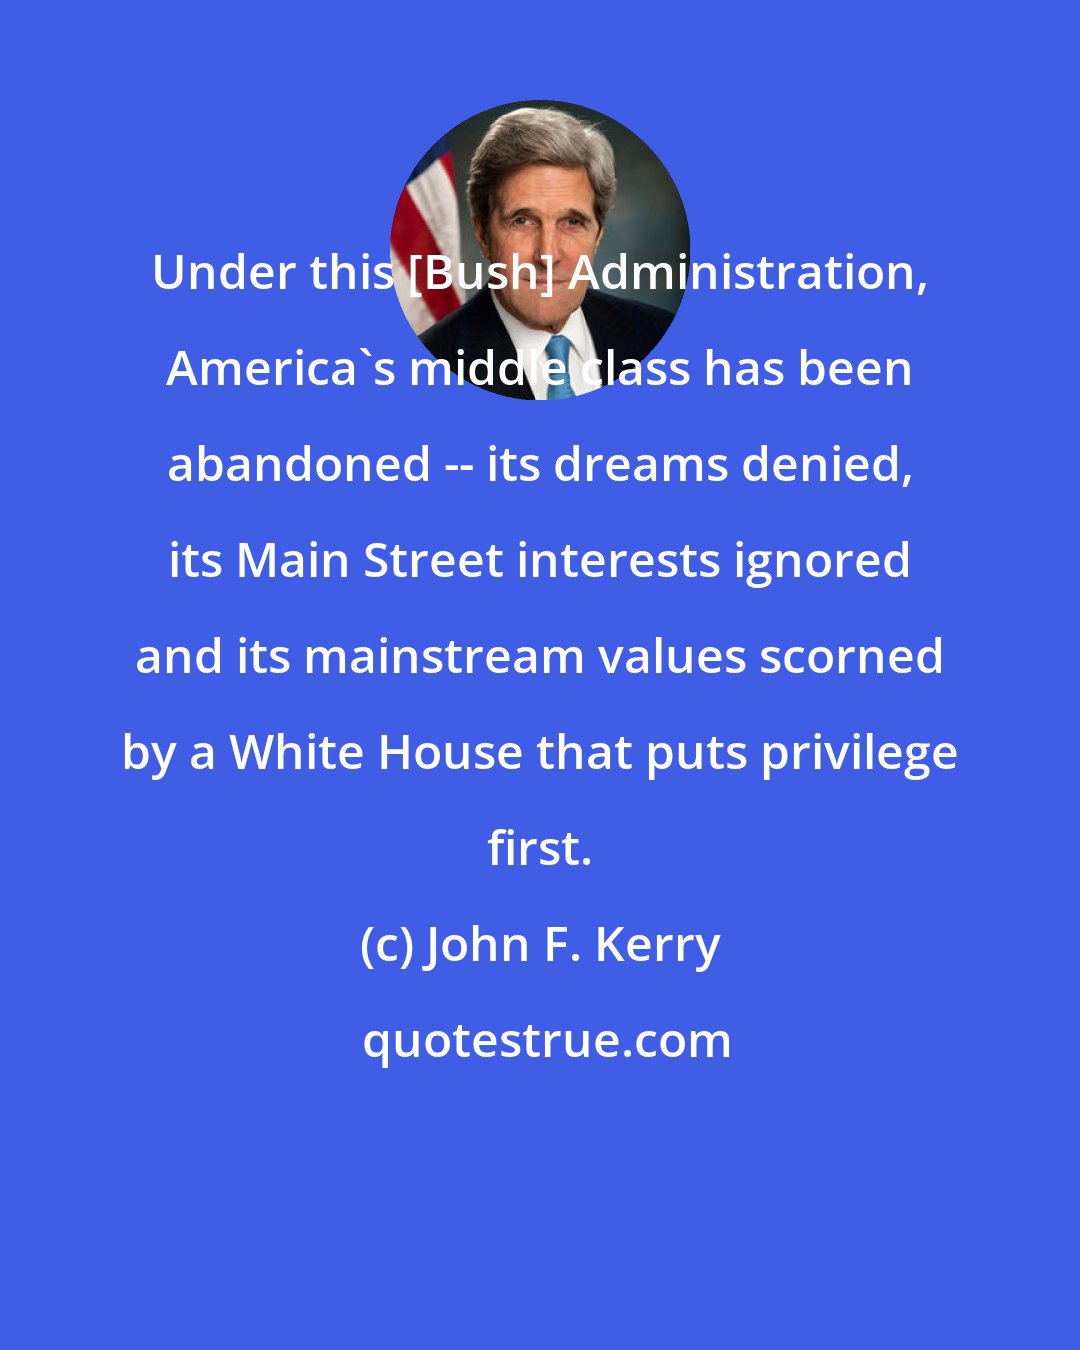 John F. Kerry: Under this [Bush] Administration, America's middle class has been abandoned -- its dreams denied, its Main Street interests ignored and its mainstream values scorned by a White House that puts privilege first.